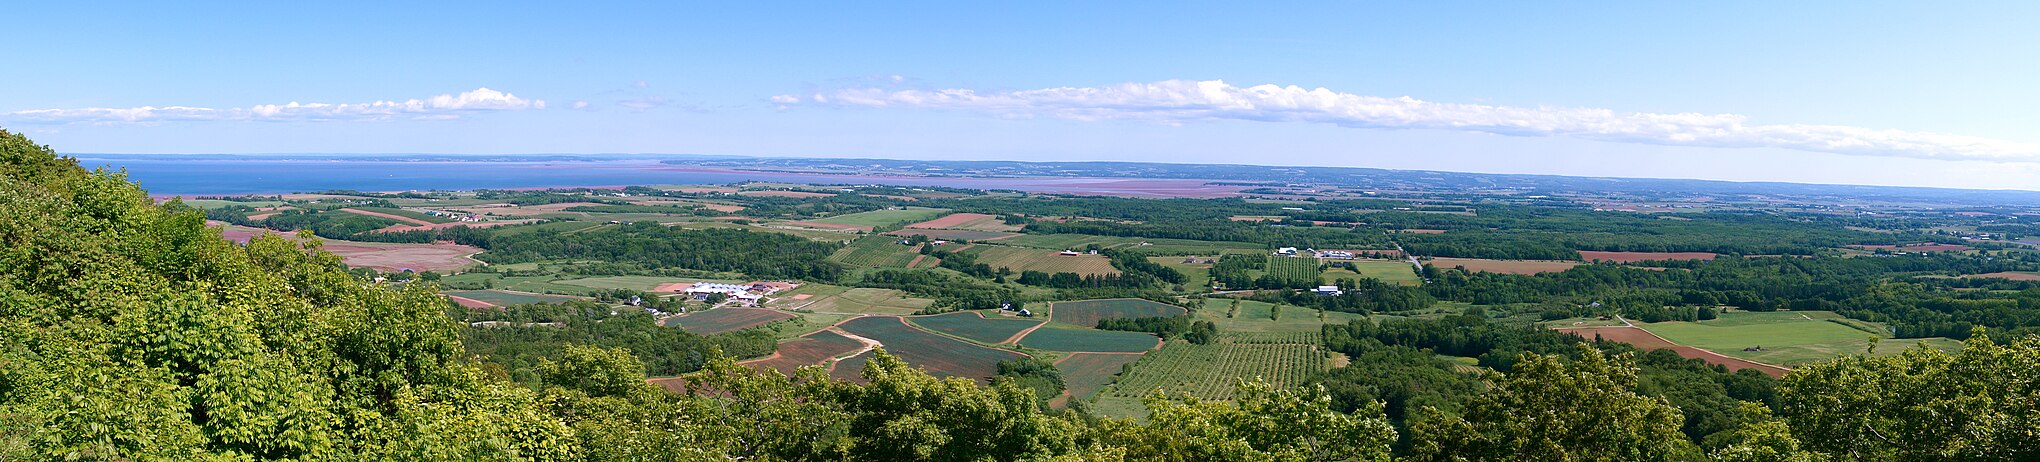 Near the Eastern End. Looking east, southeast across the Annapolis Valley from the area known as "The Lookoff", North Mountain, Nova Scotia, Canada